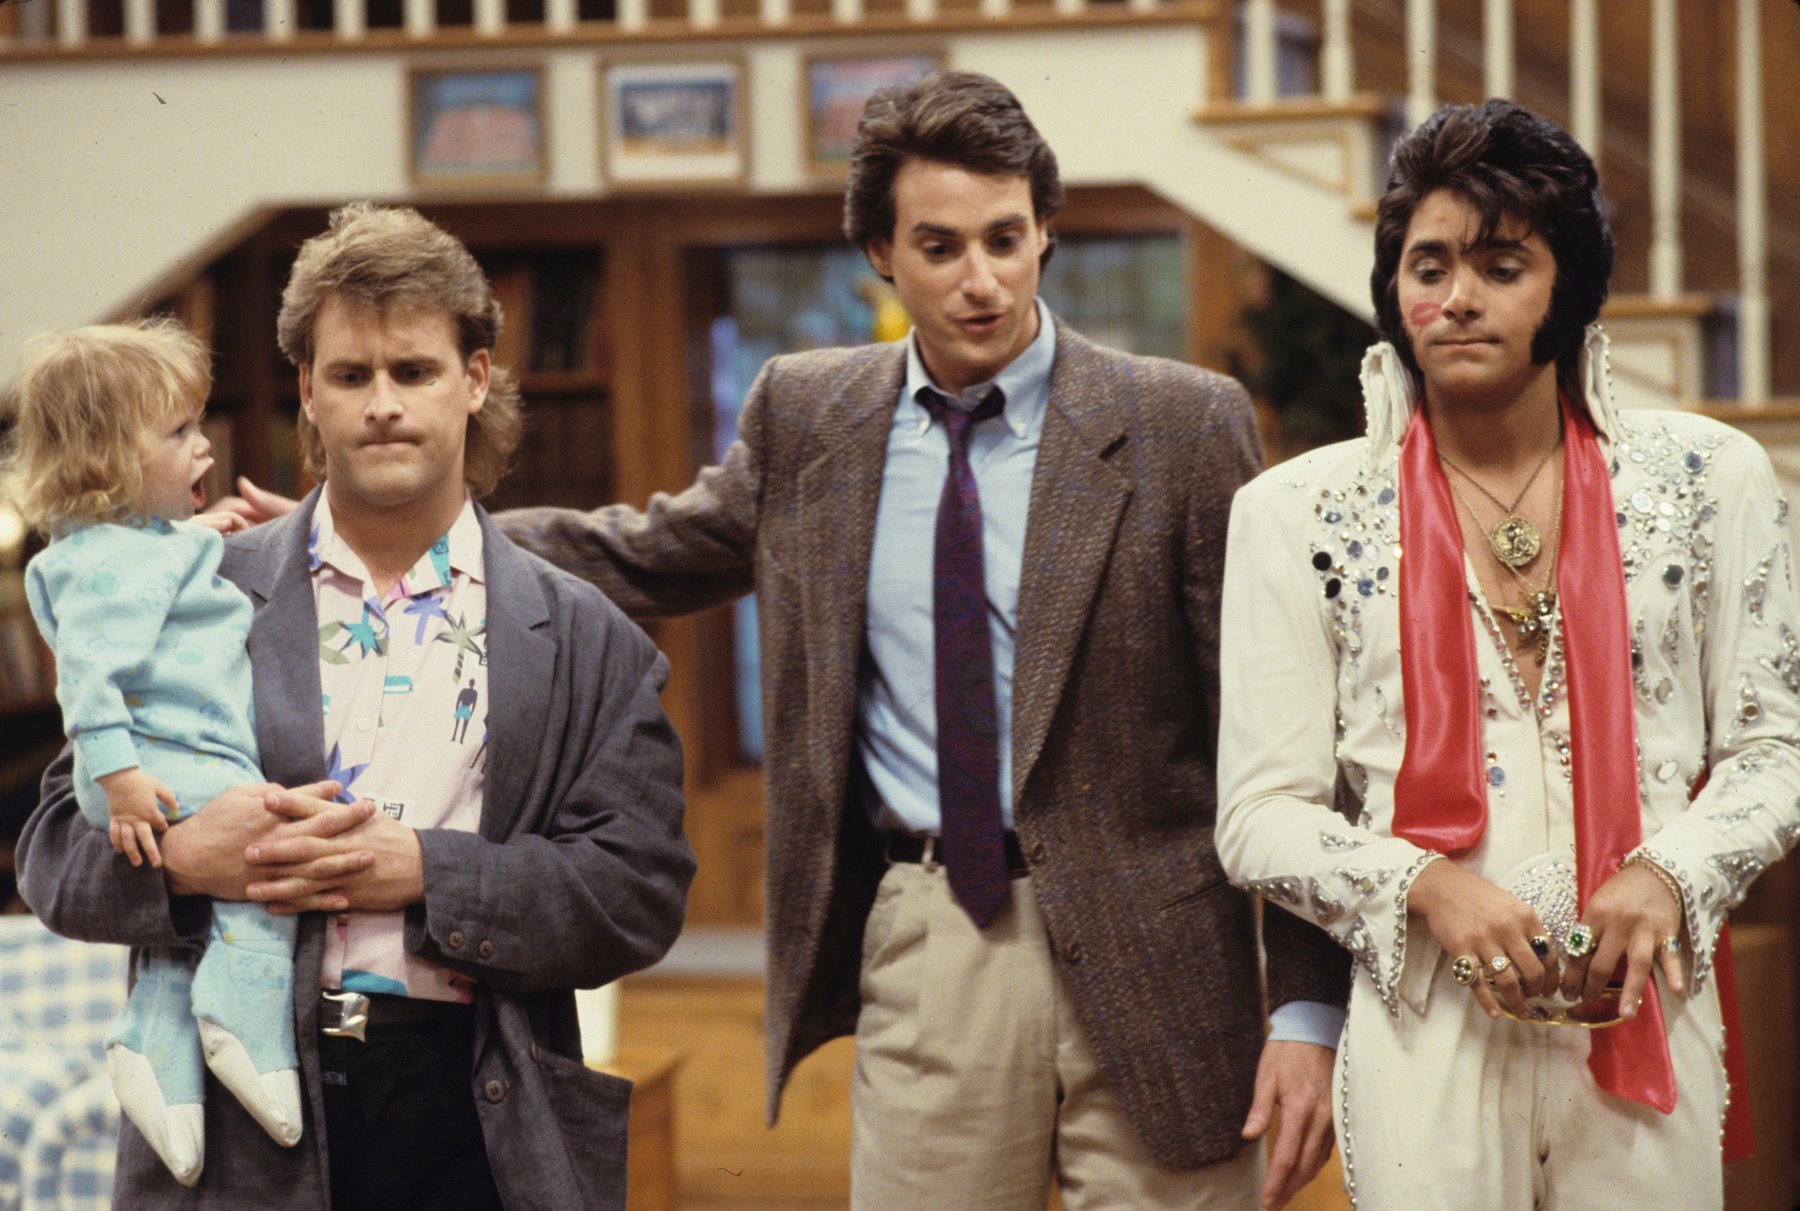 Bob Saget in the 'Full House' episode, 'Mad Money,' dressed in a suit next to the characters Joey Gladstone and Uncle Jesse